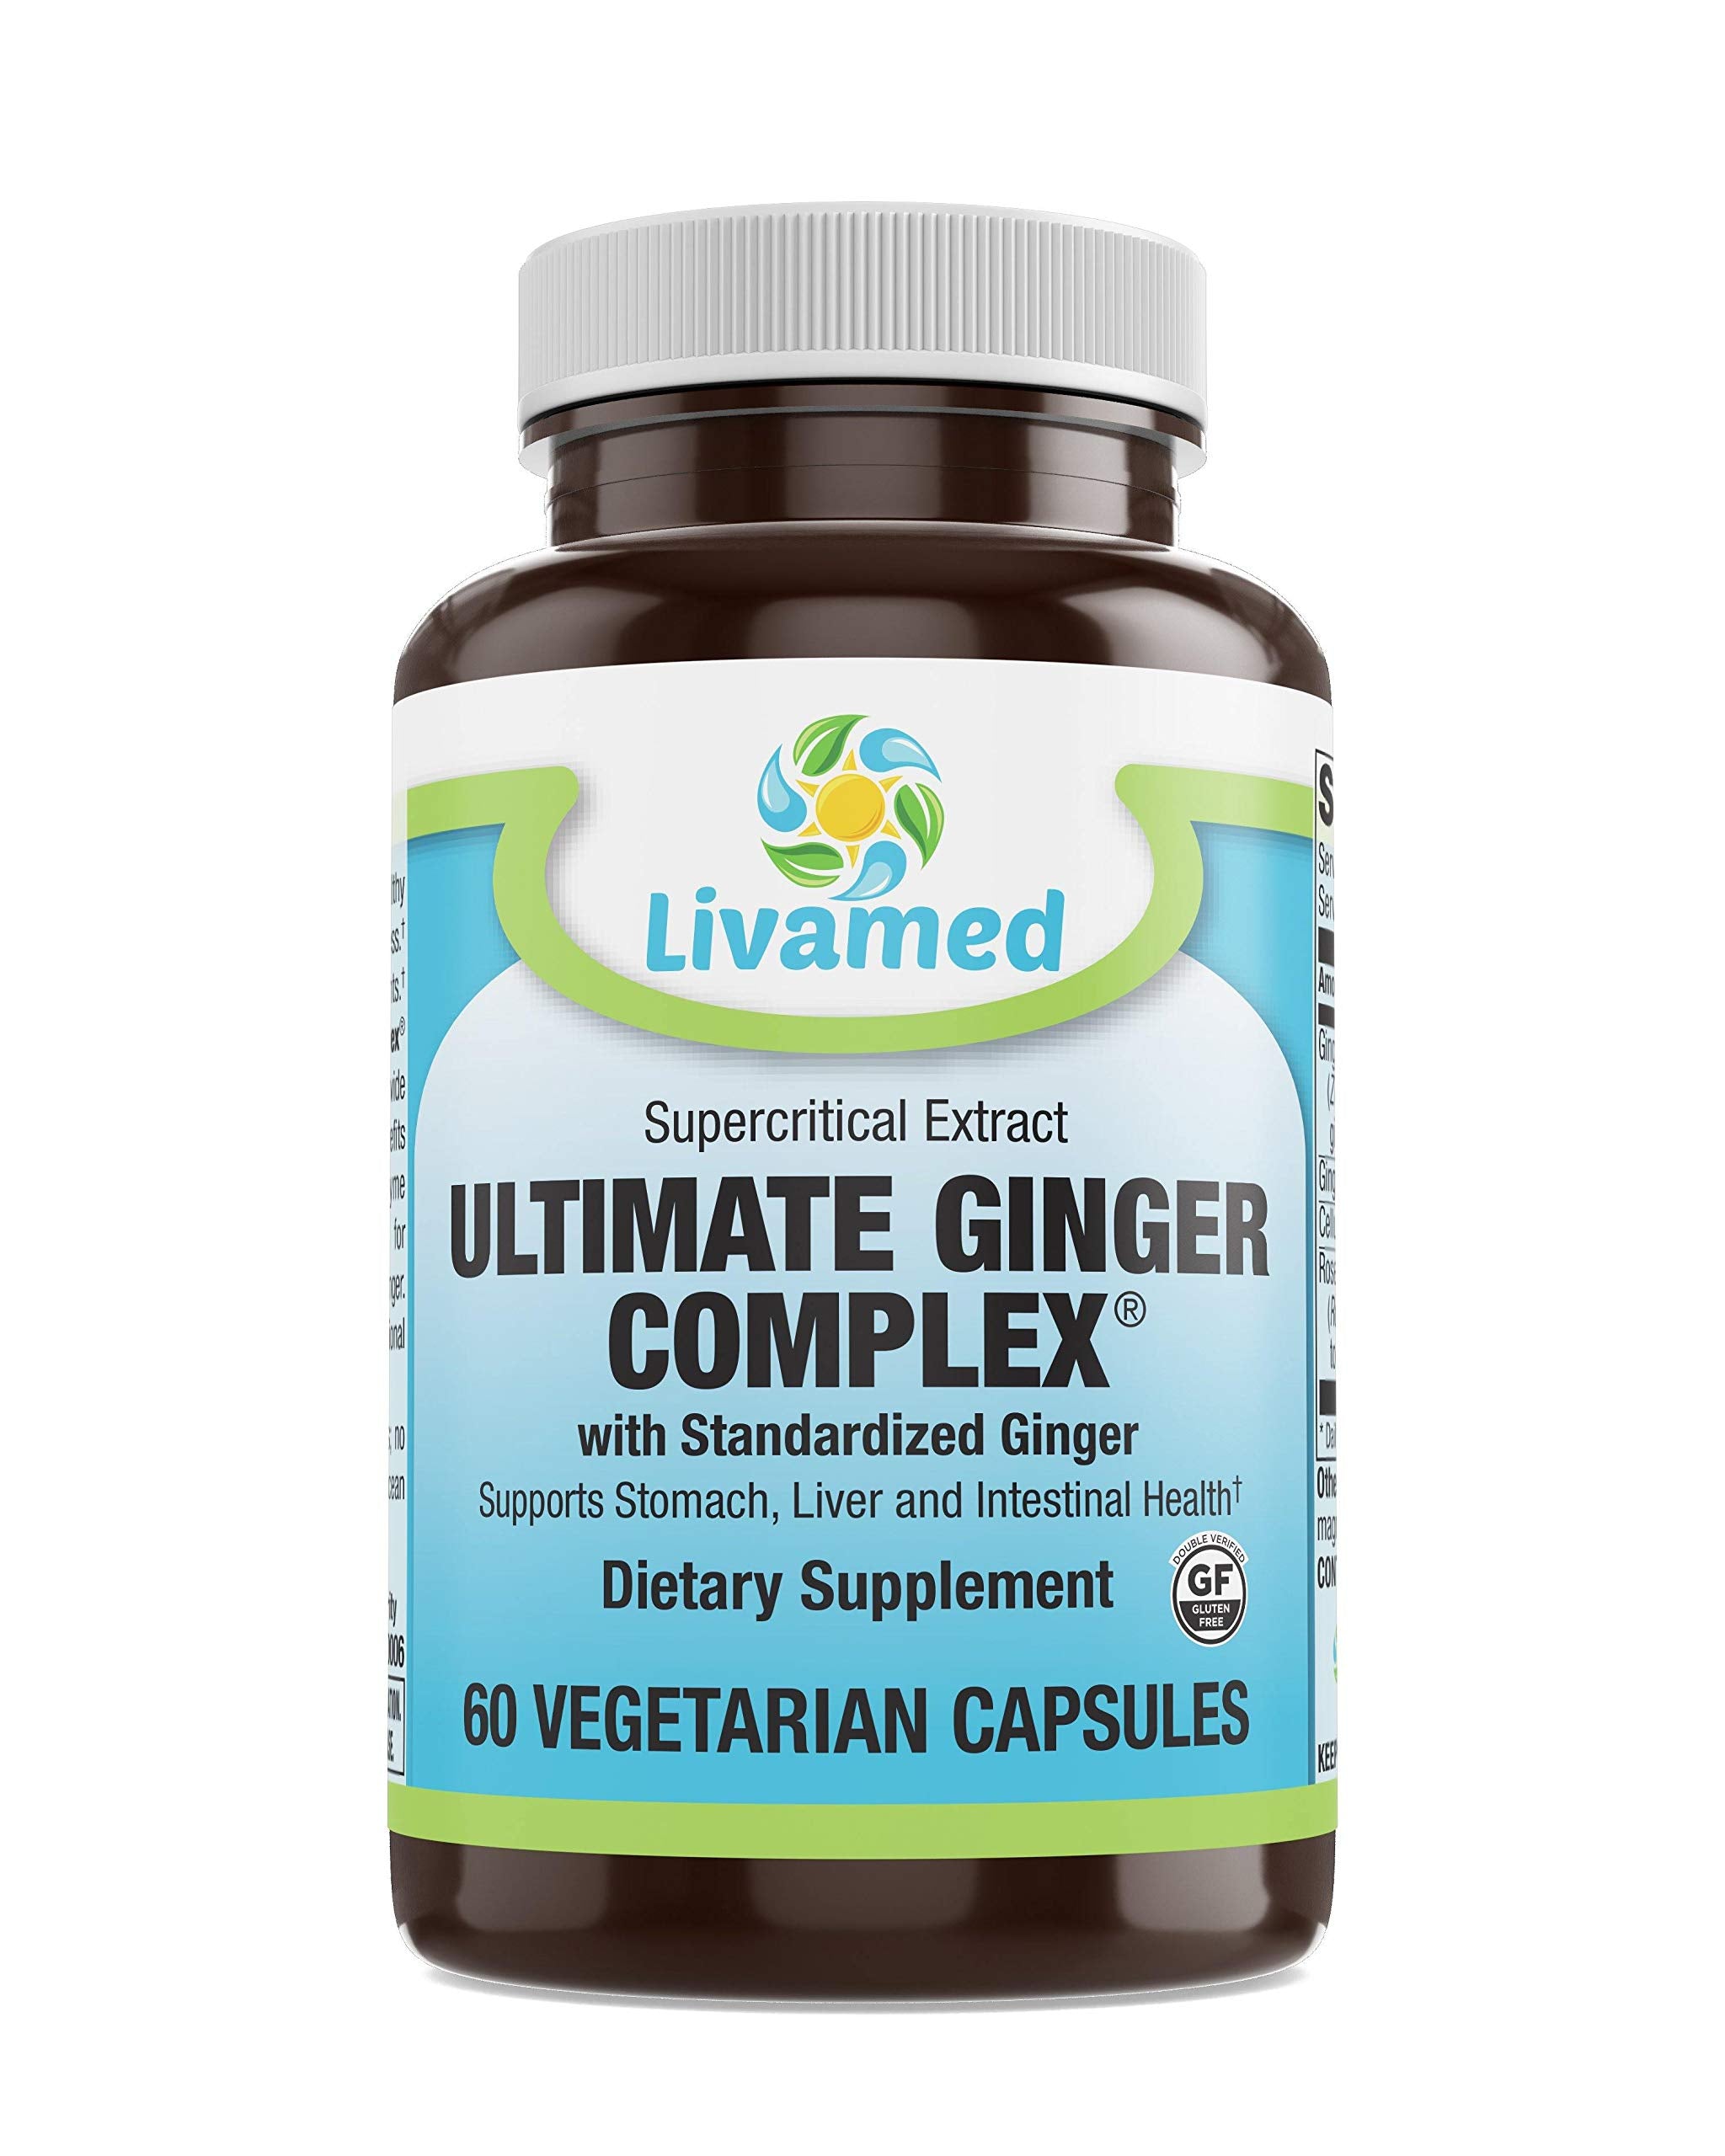 Livamed - Ultimate Ginger Complex® with Standardized Ginger Veg Caps 60 Count